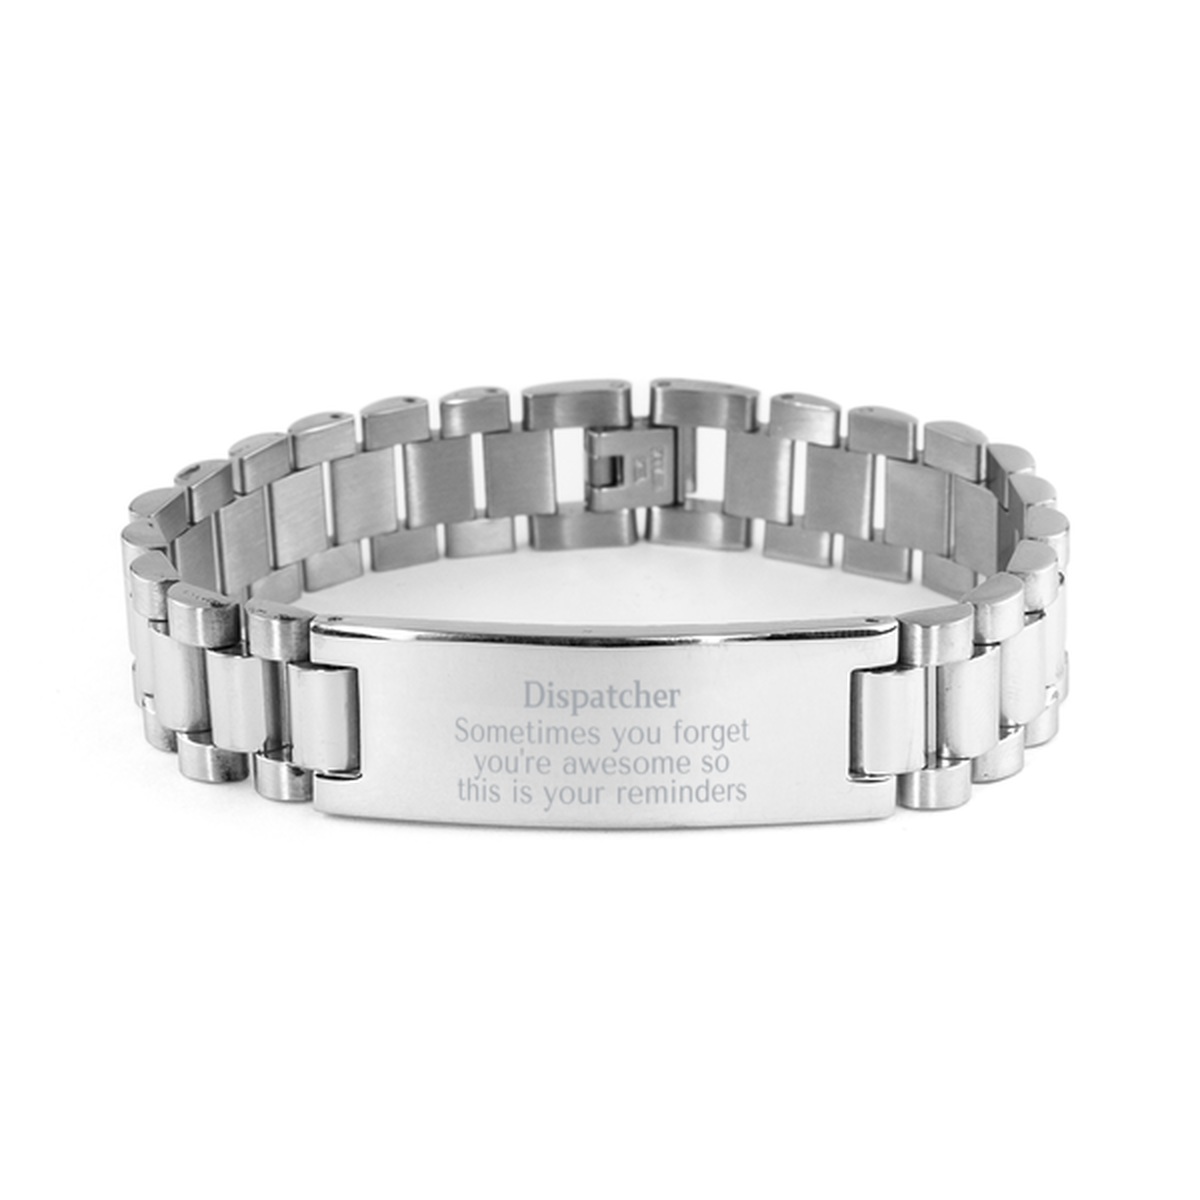 Sentimental Dispatcher Ladder Stainless Steel Bracelet, Dispatcher Sometimes you forget you're awesome so this is your reminders, Graduation Christmas Birthday Gifts for Dispatcher, Men, Women, Coworkers